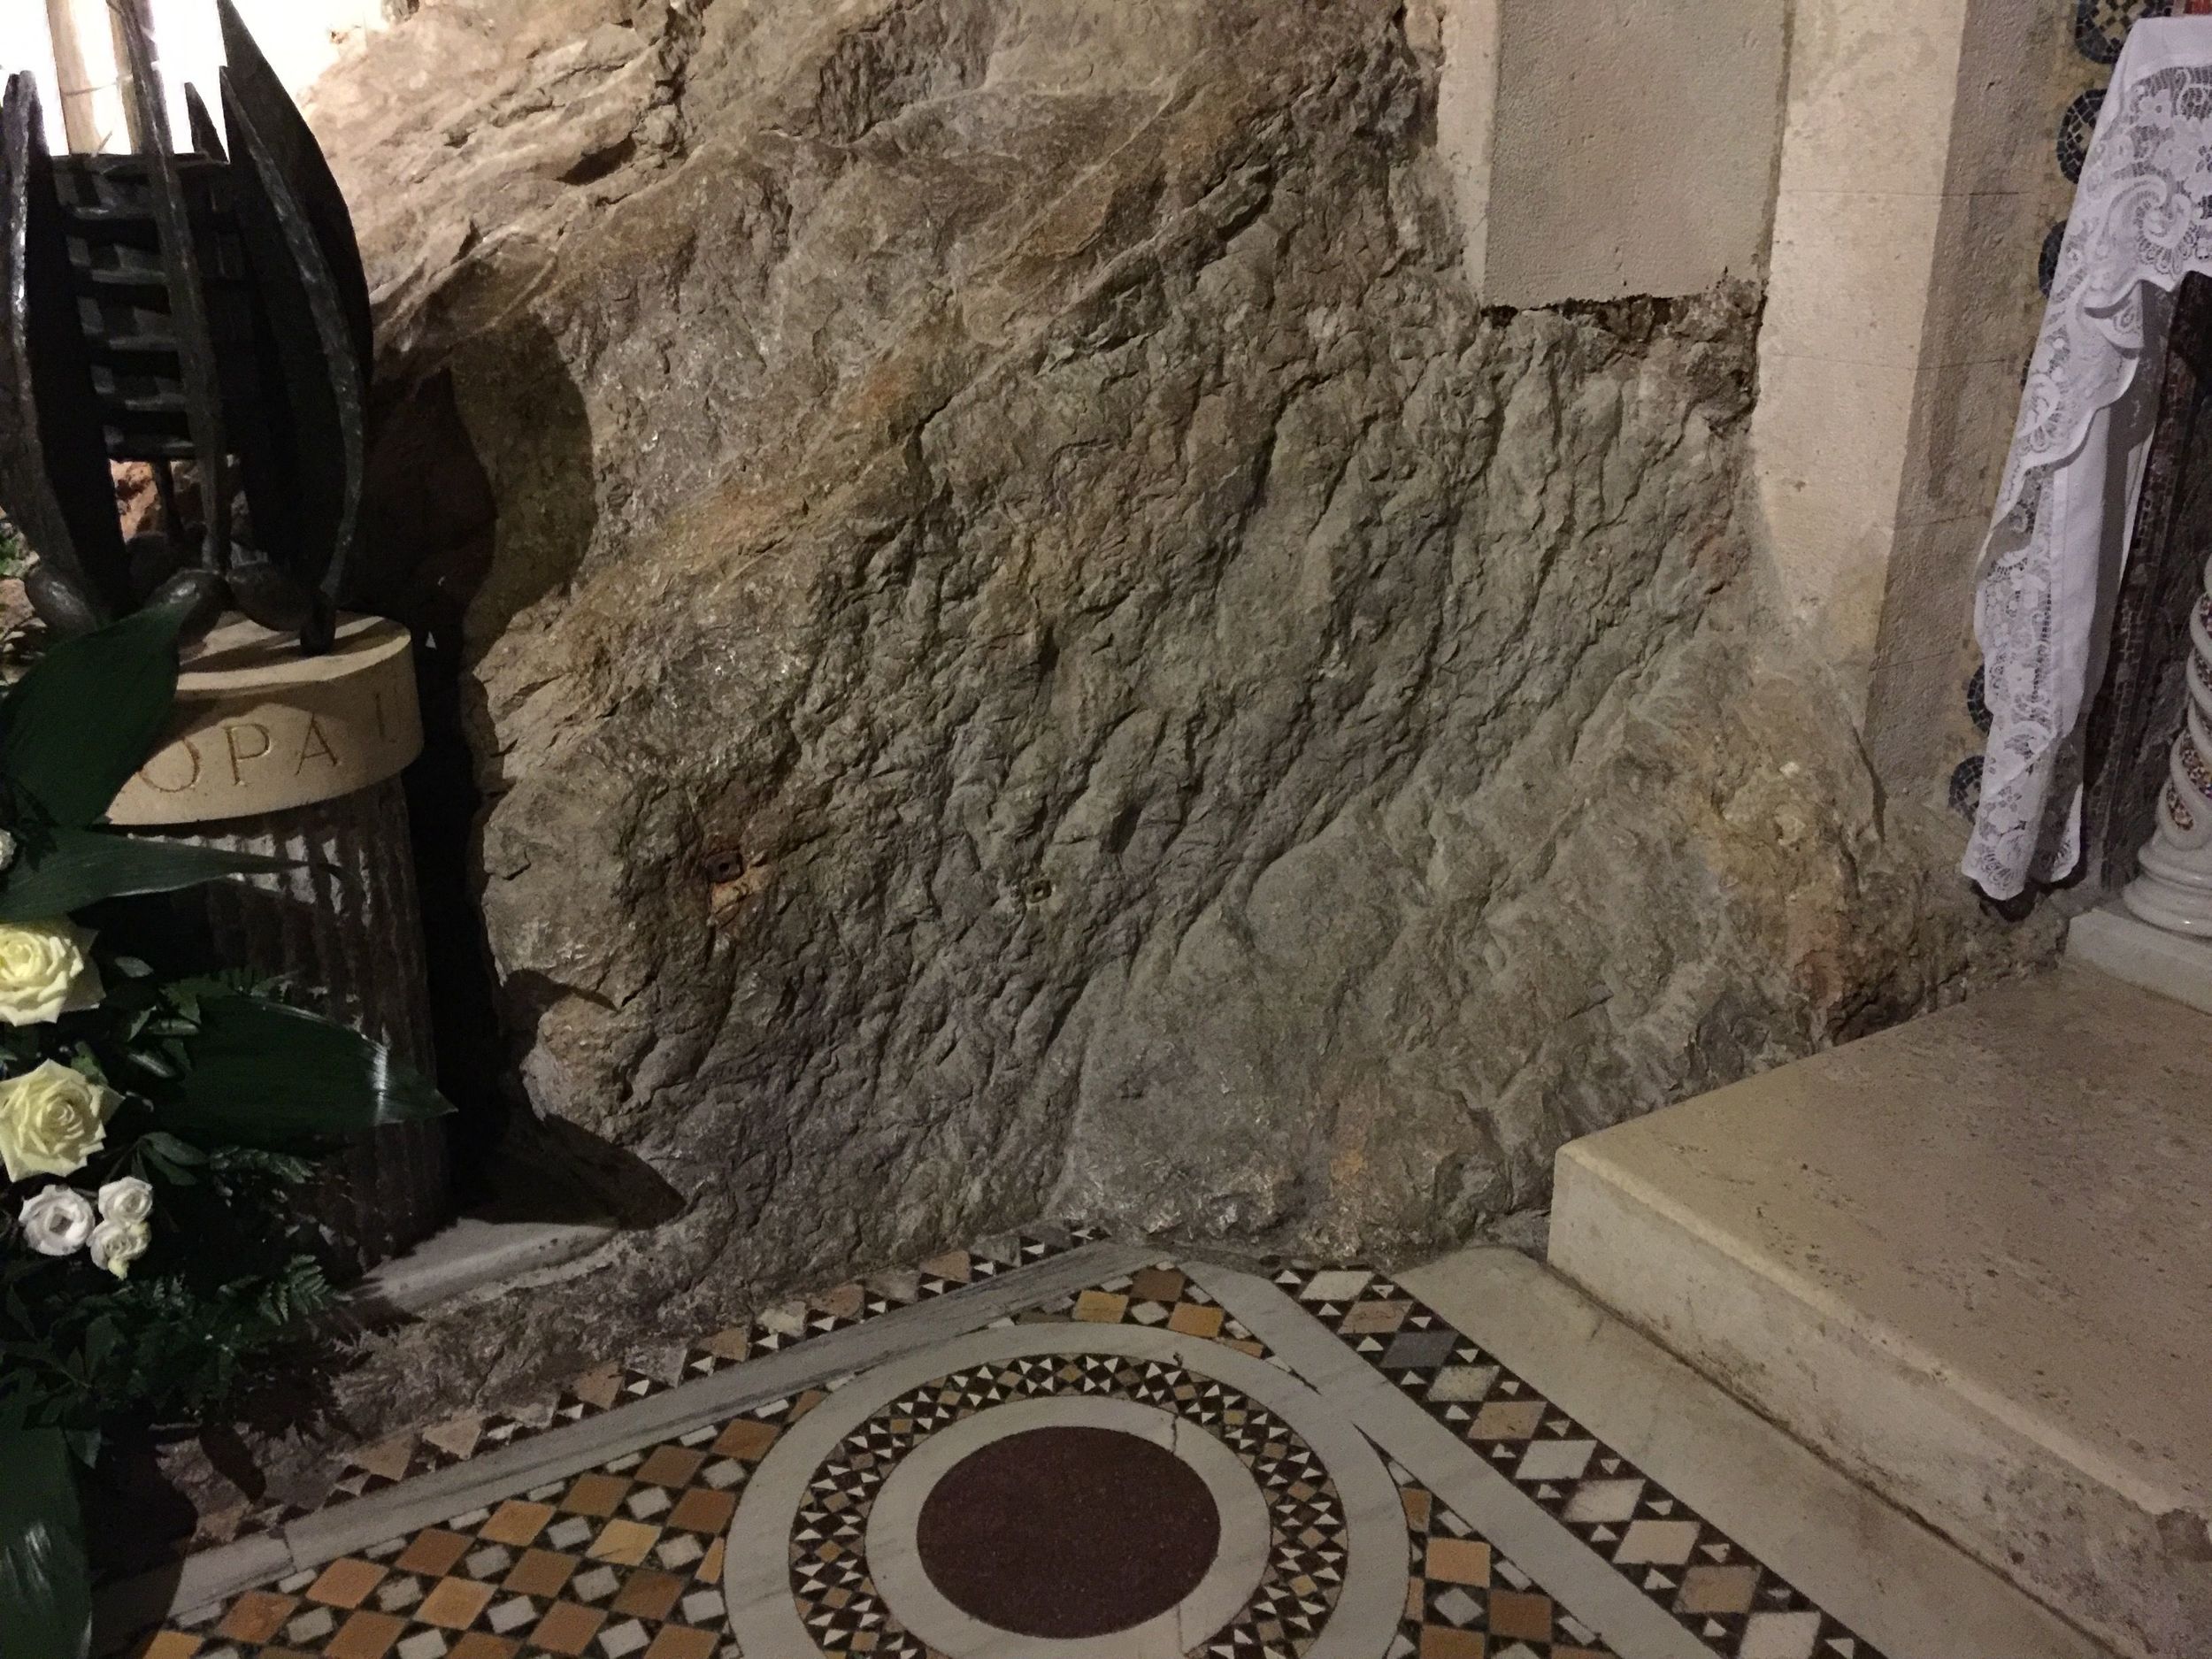  Where the mosaic joins the cave wall. 